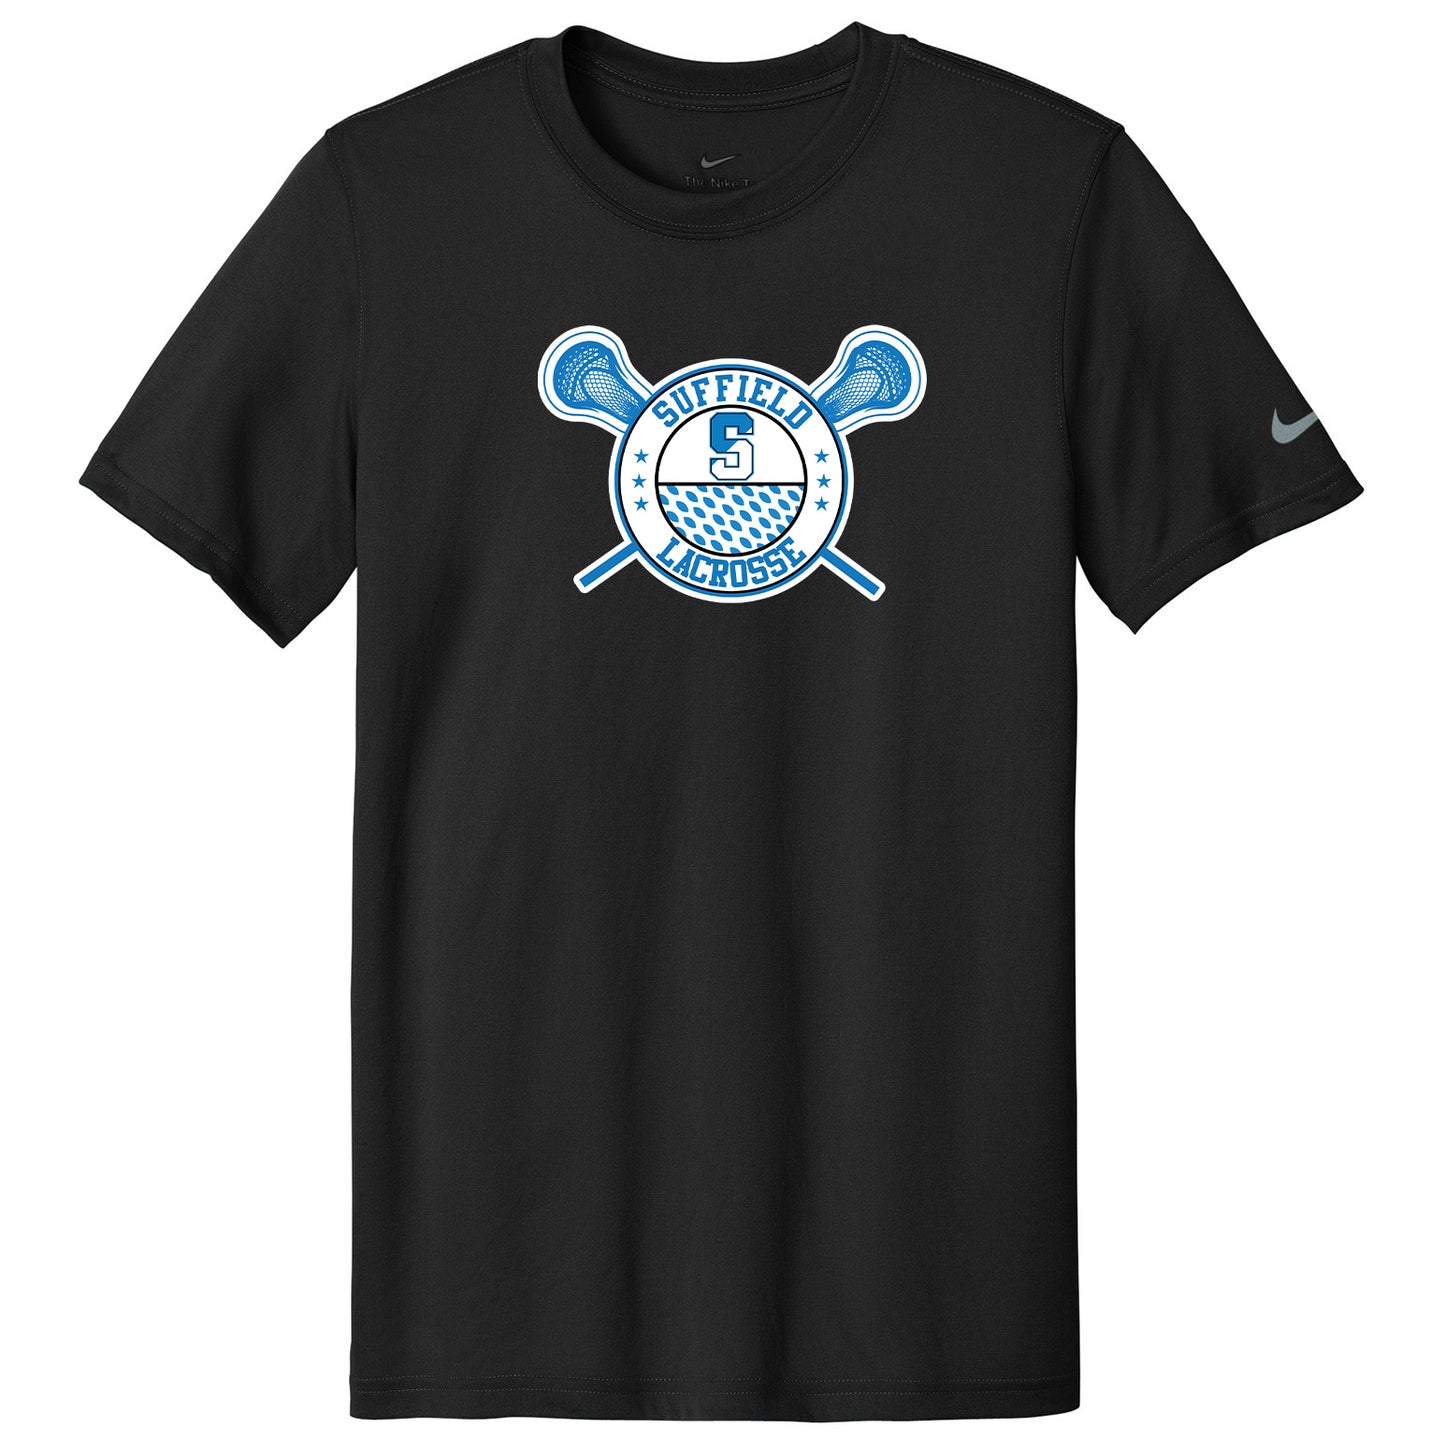 Suffield Youth Lacrosse - Ladies Nike Tee "Cat" - NKDX8734 (color options available)